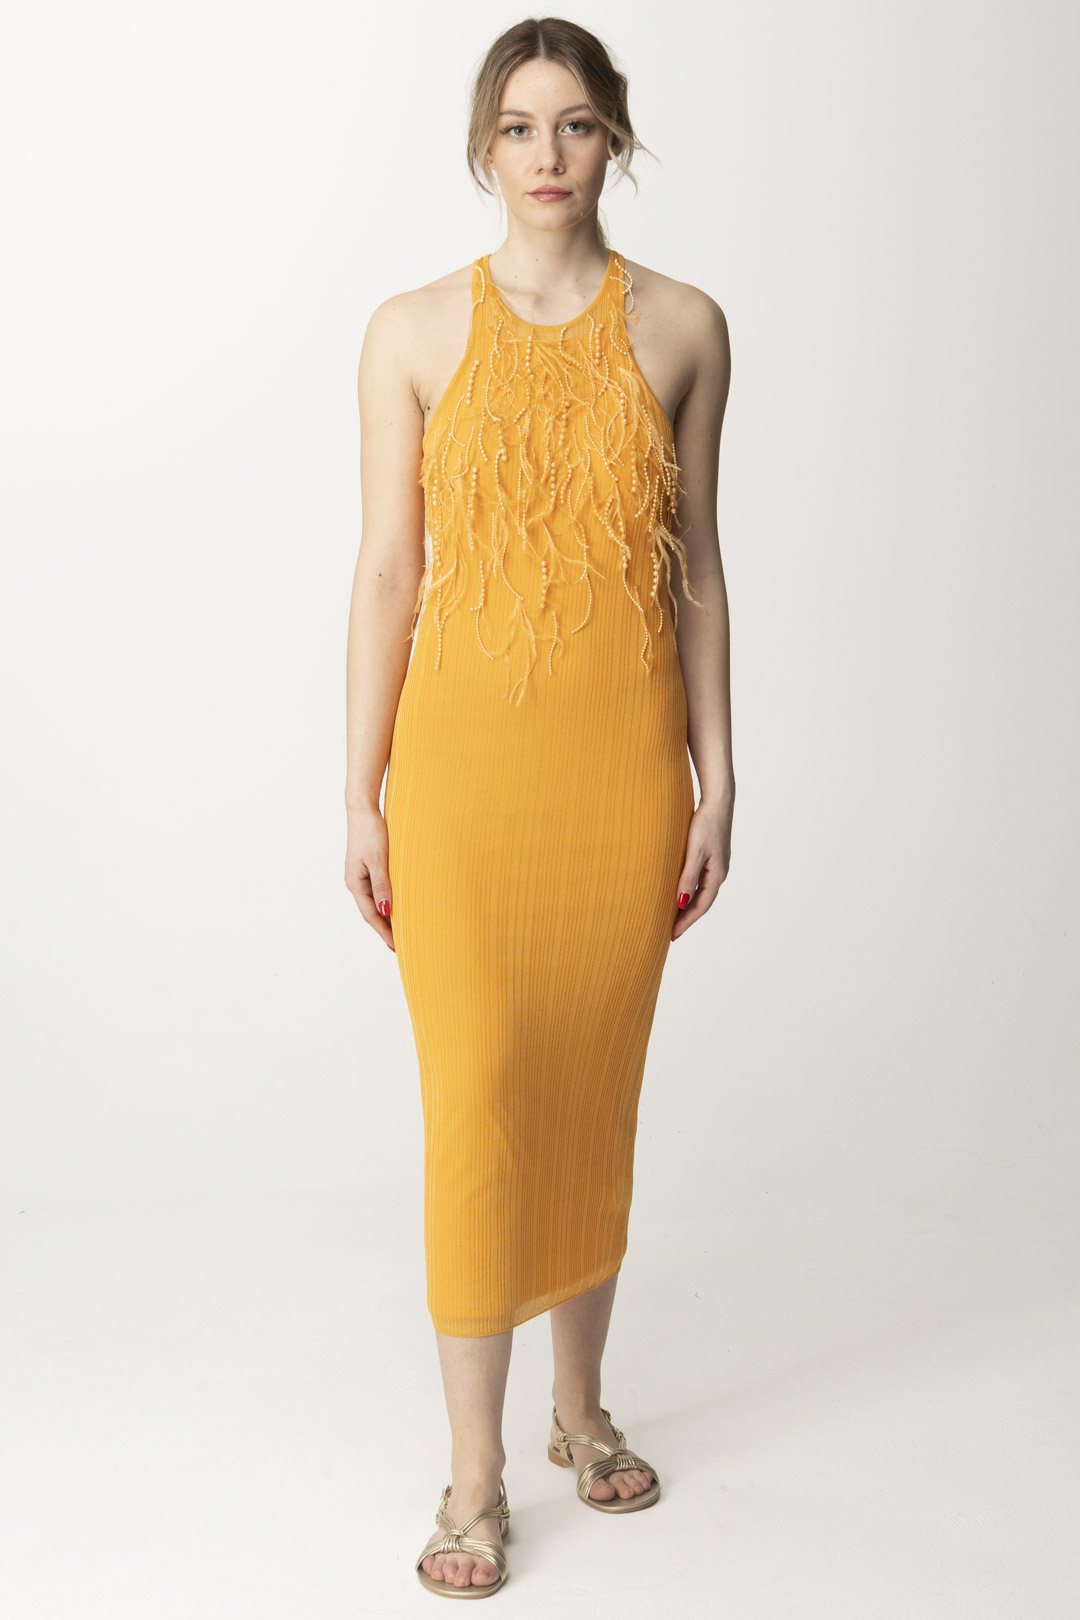 Preview: Patrizia Pepe Midi dress with beads and feathers Orange Sorbet